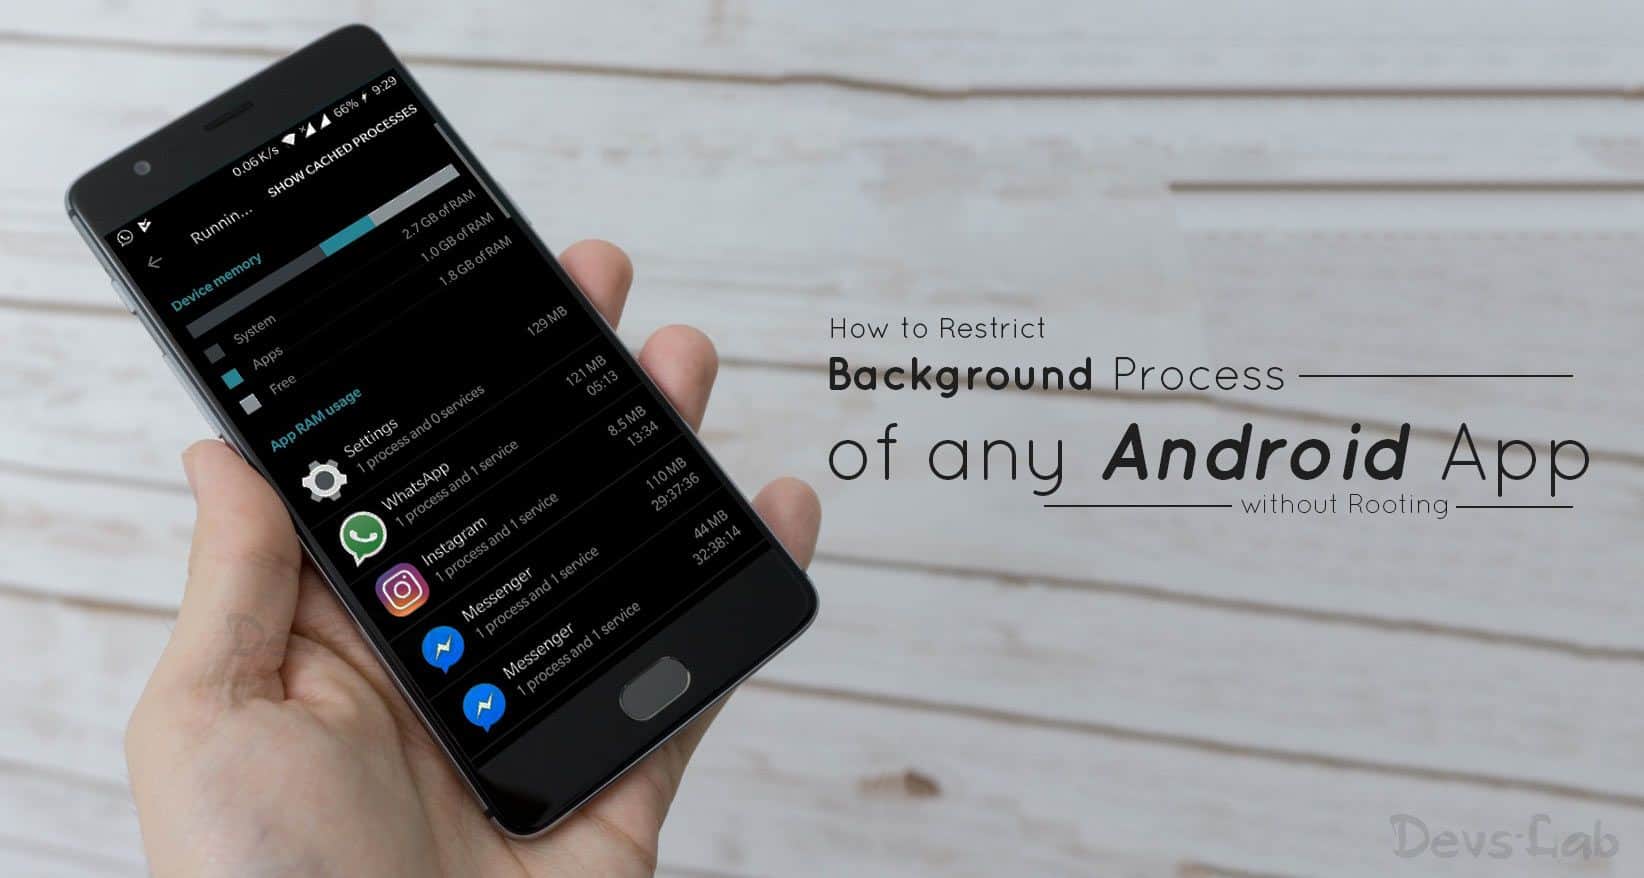 How to Restrict Background Process of any Android App without Rooting